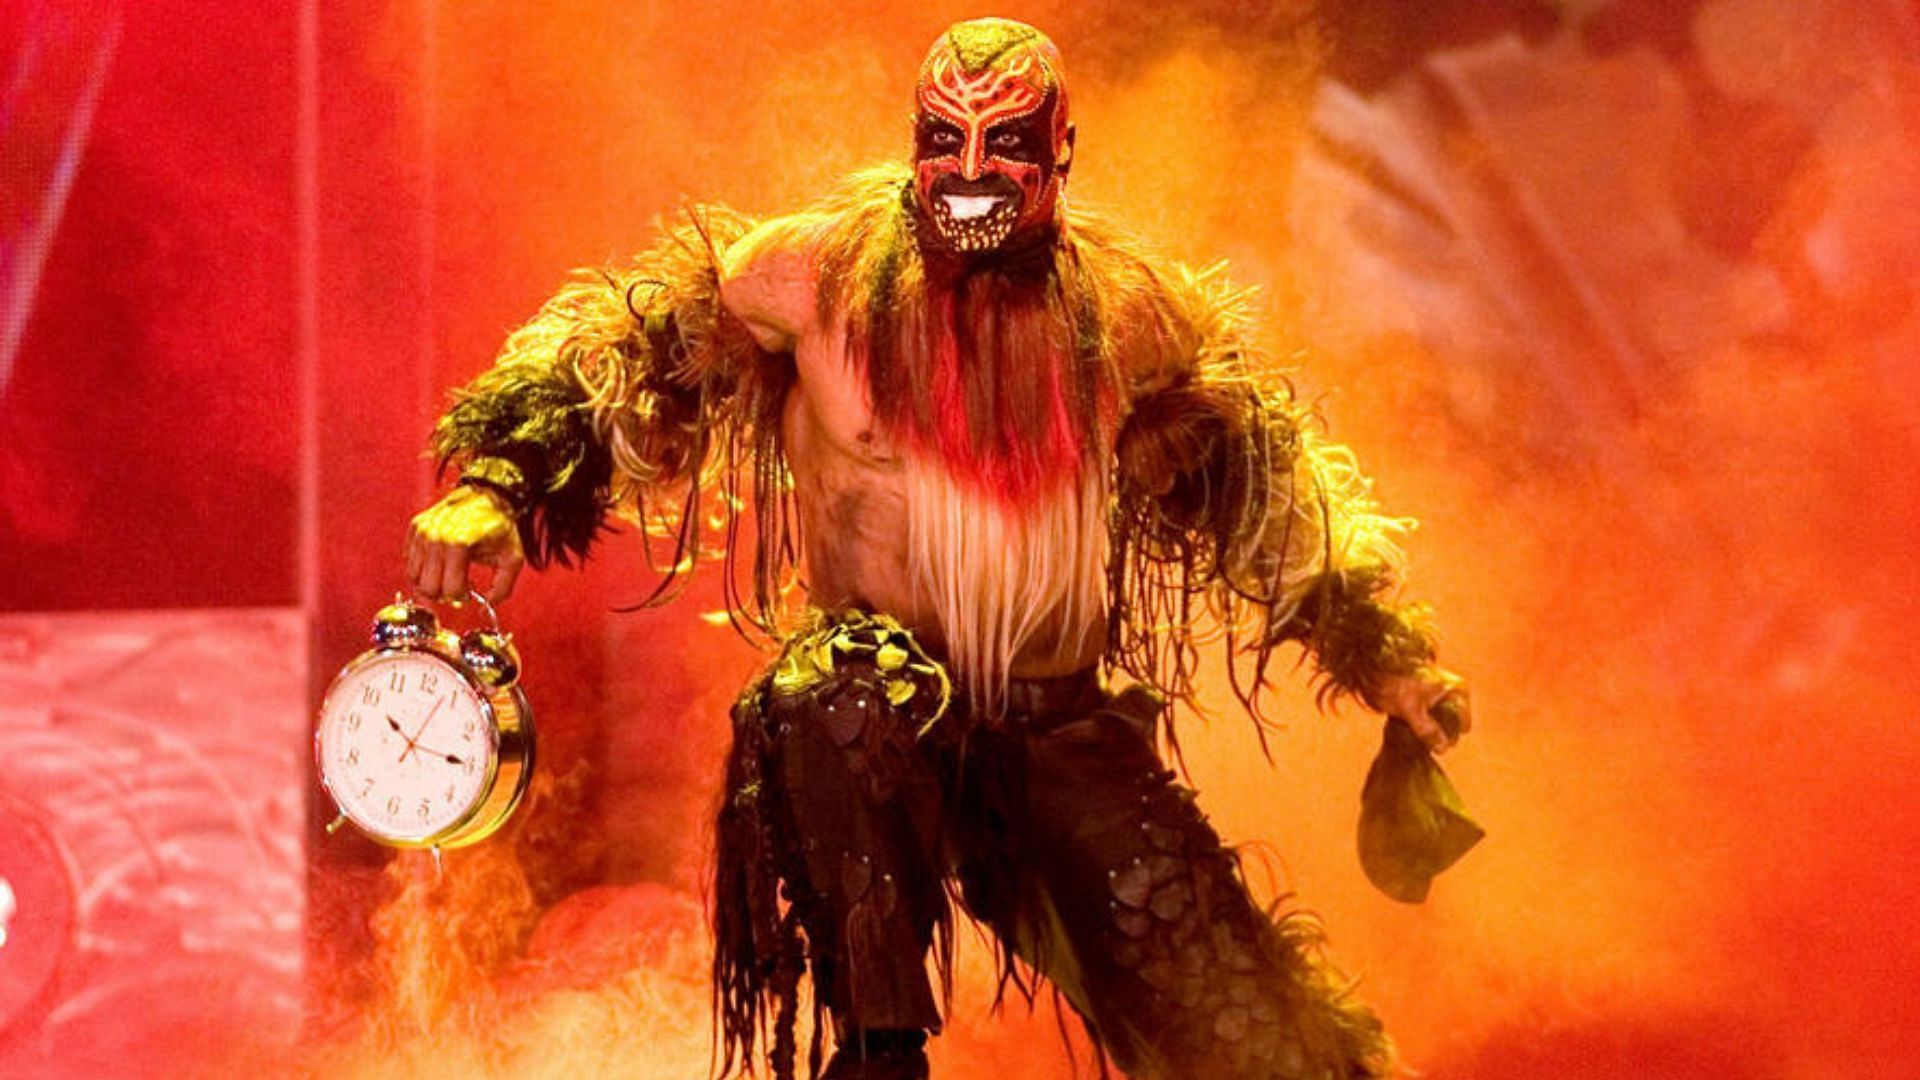 WWE legend The Boogeyman making his way to the ring